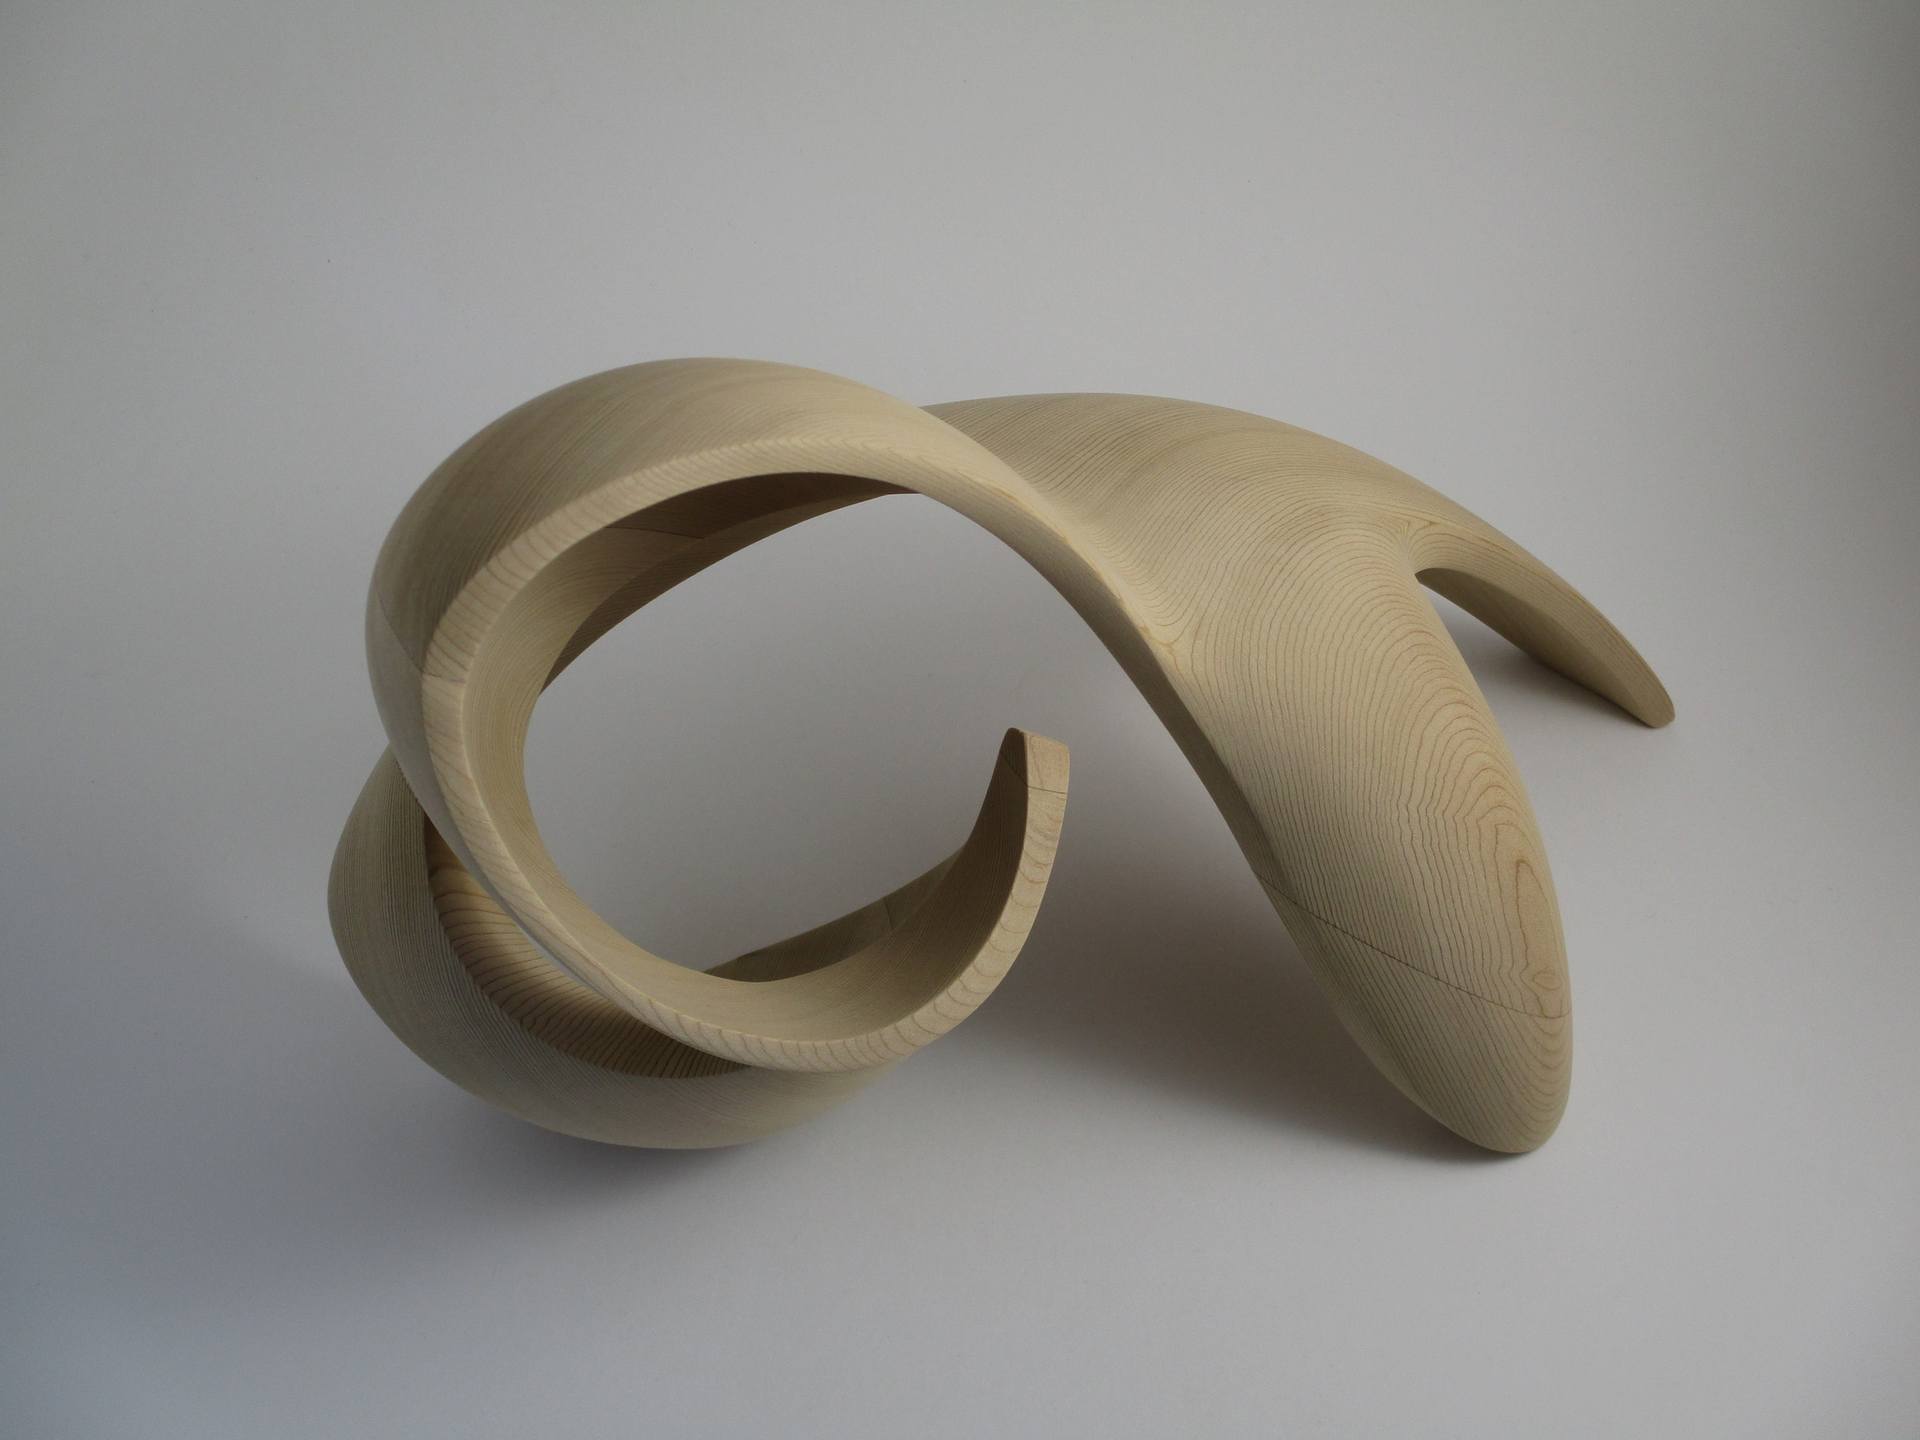 Thought and Meditation Wood Sculpture - Abstract Sitting – GlobeIn